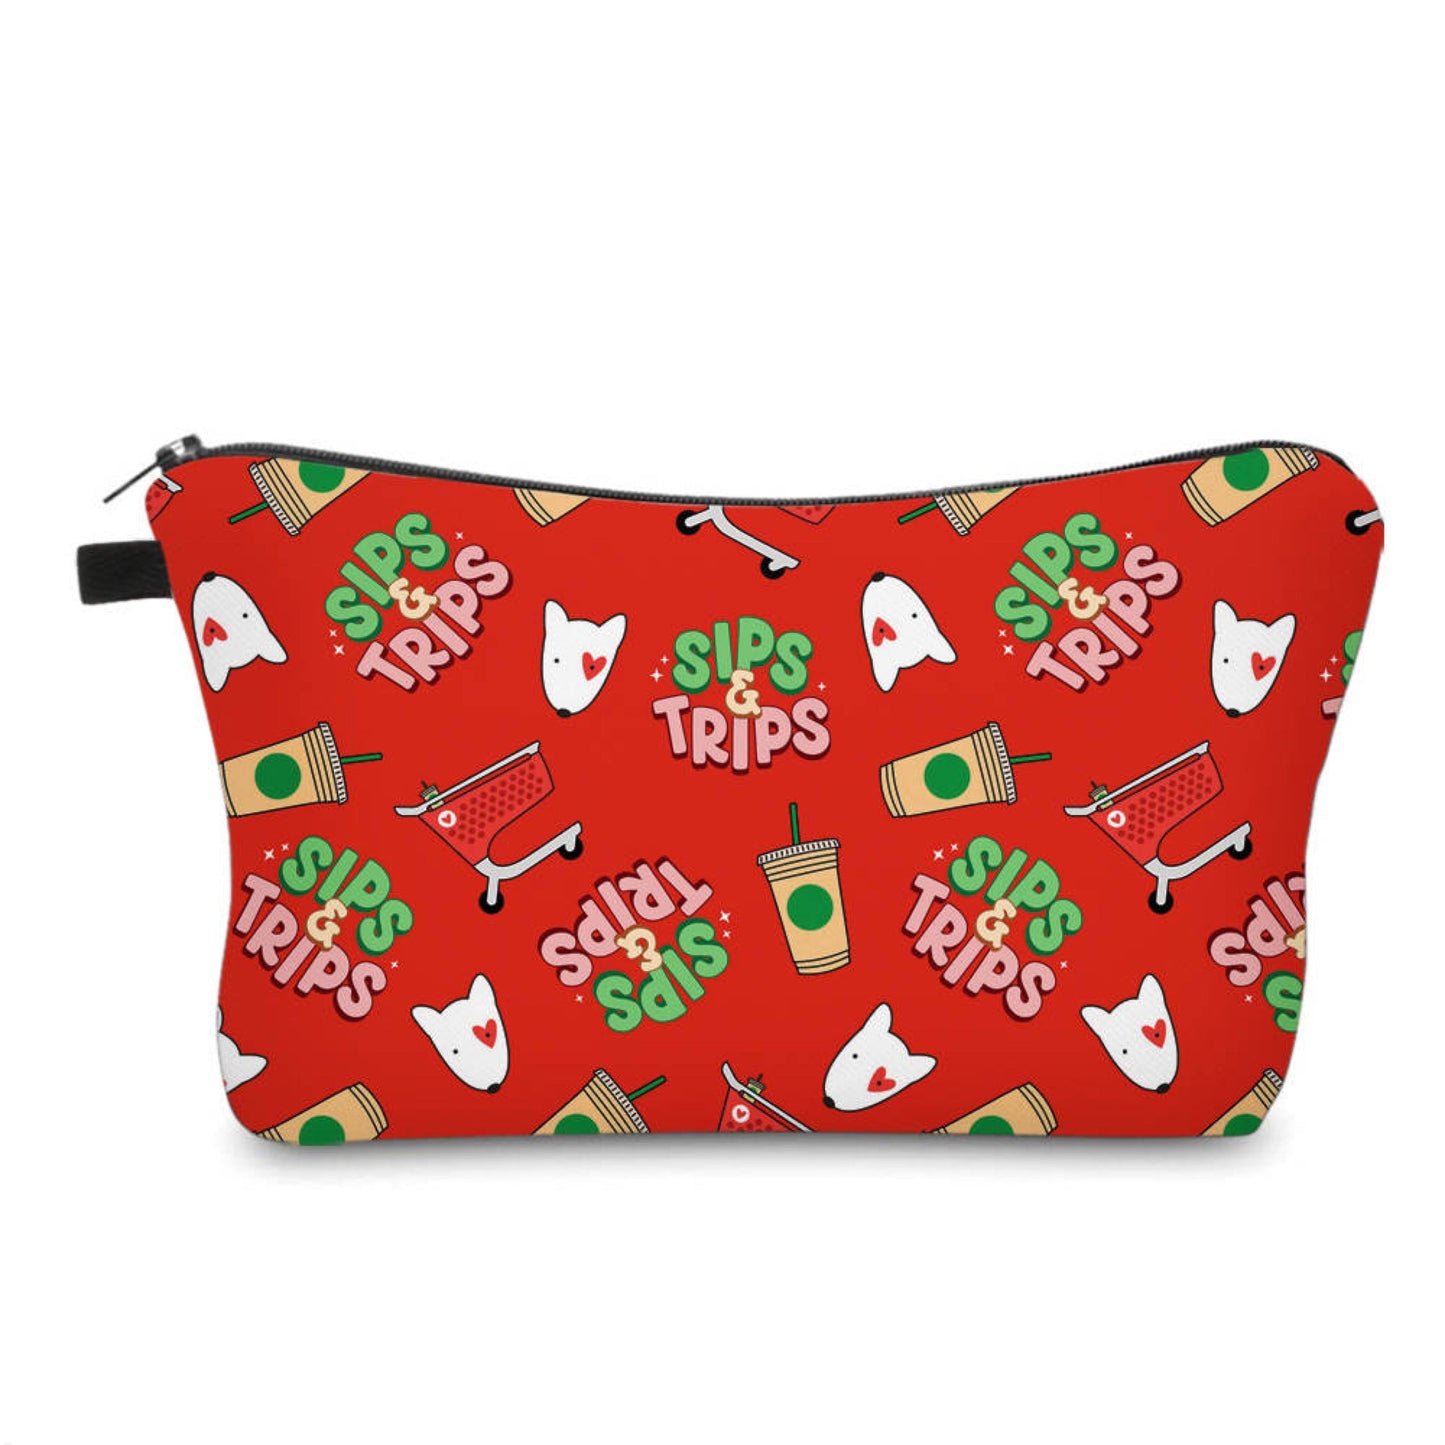 Pouch - Sips & Trips, Red